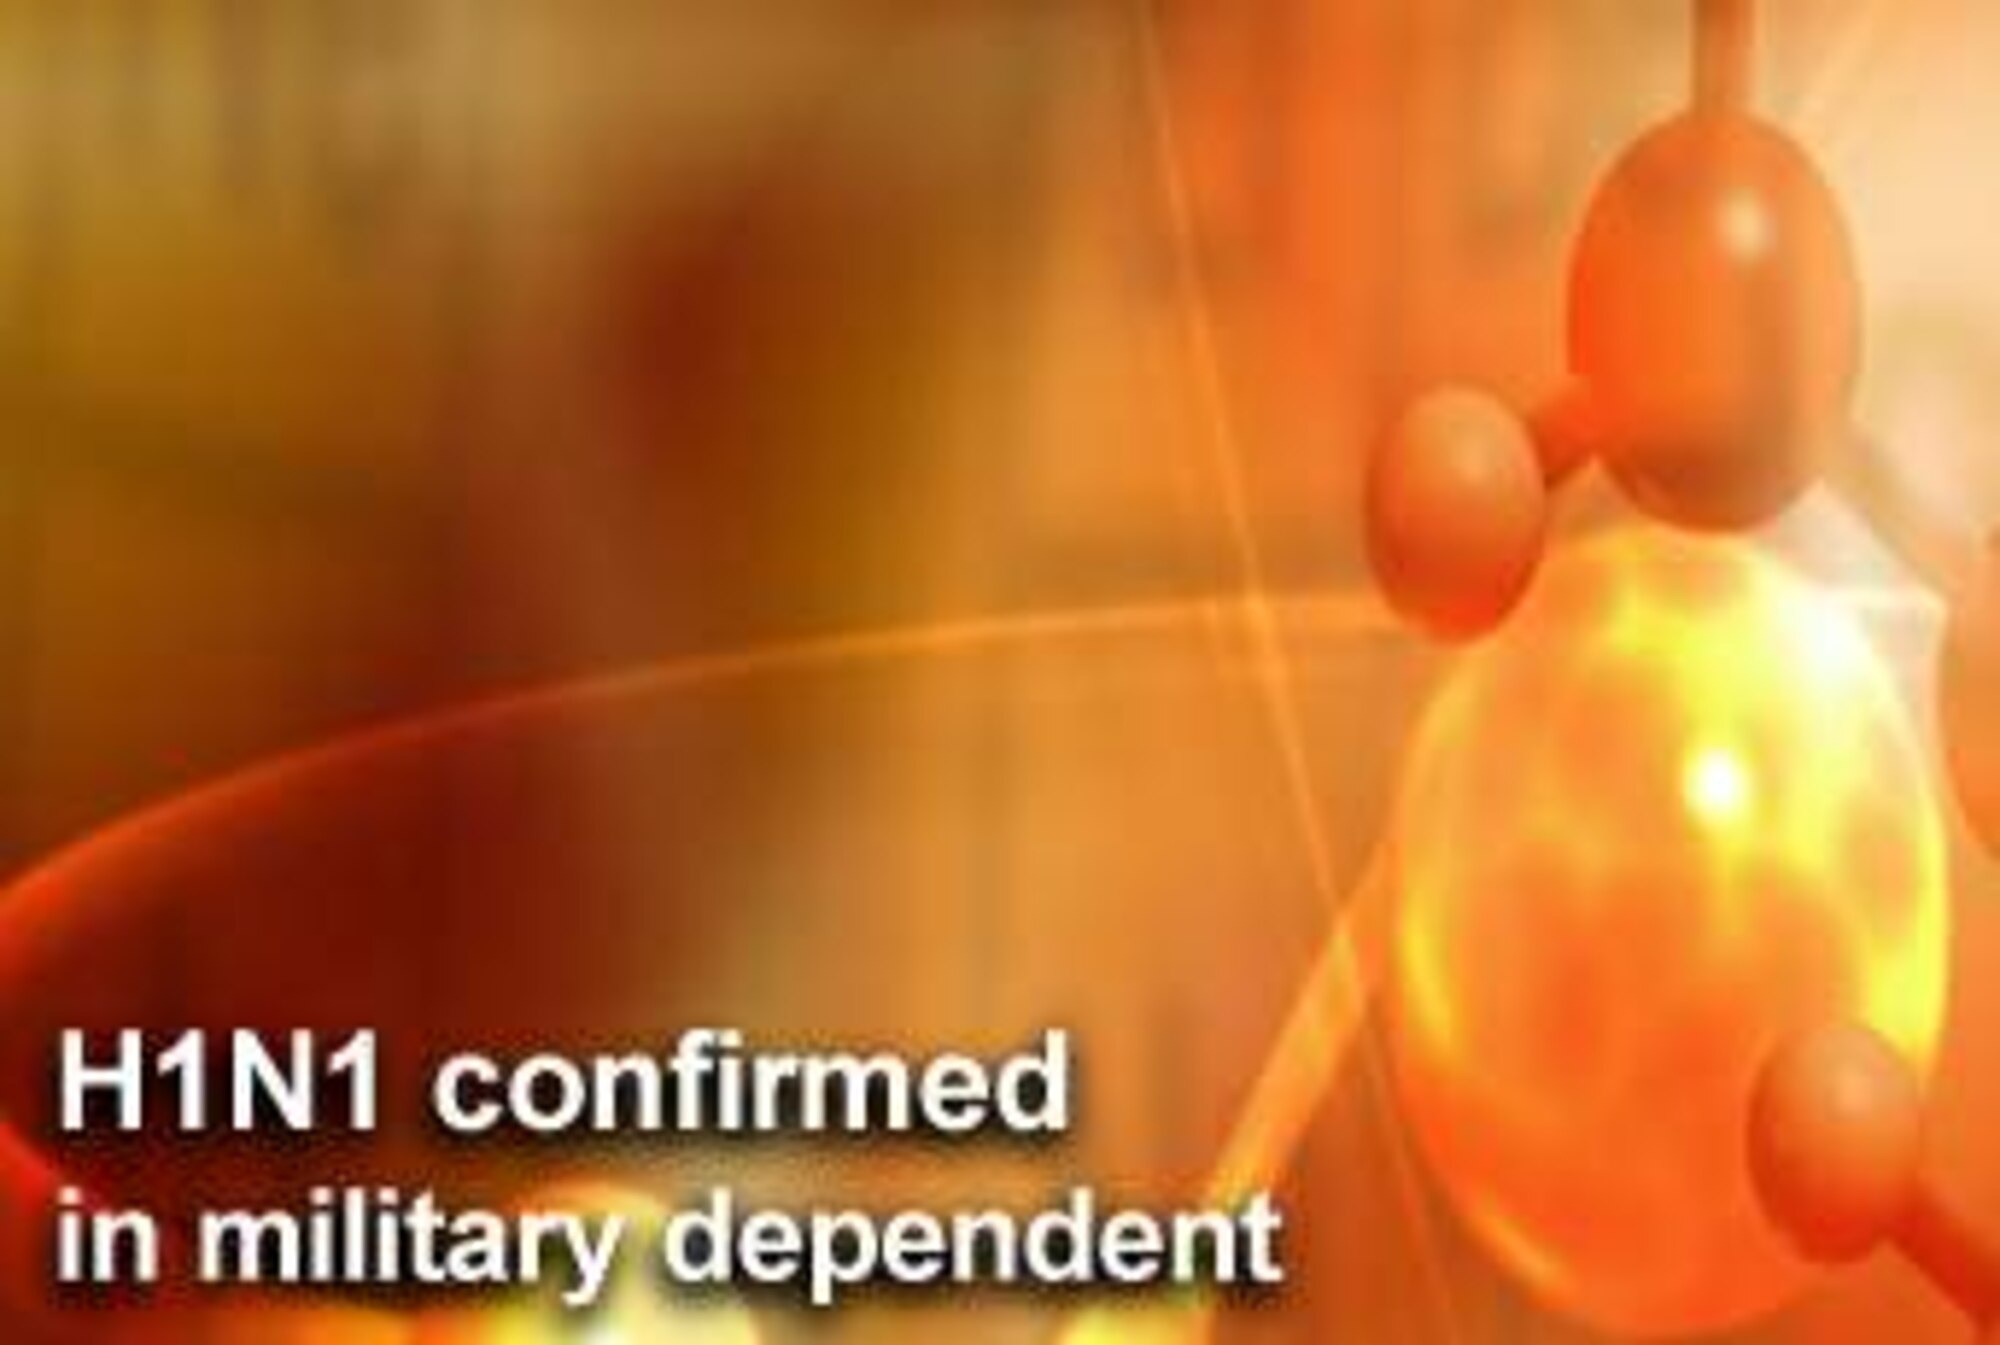 Centers for Disease Control and Prevention officials confirmed one isolated case of the H1N1 flu virus involving an 11-year-old boy who is a military dependent at Nellis Air Force Base, Nev. (U.S. Air Force graphic)